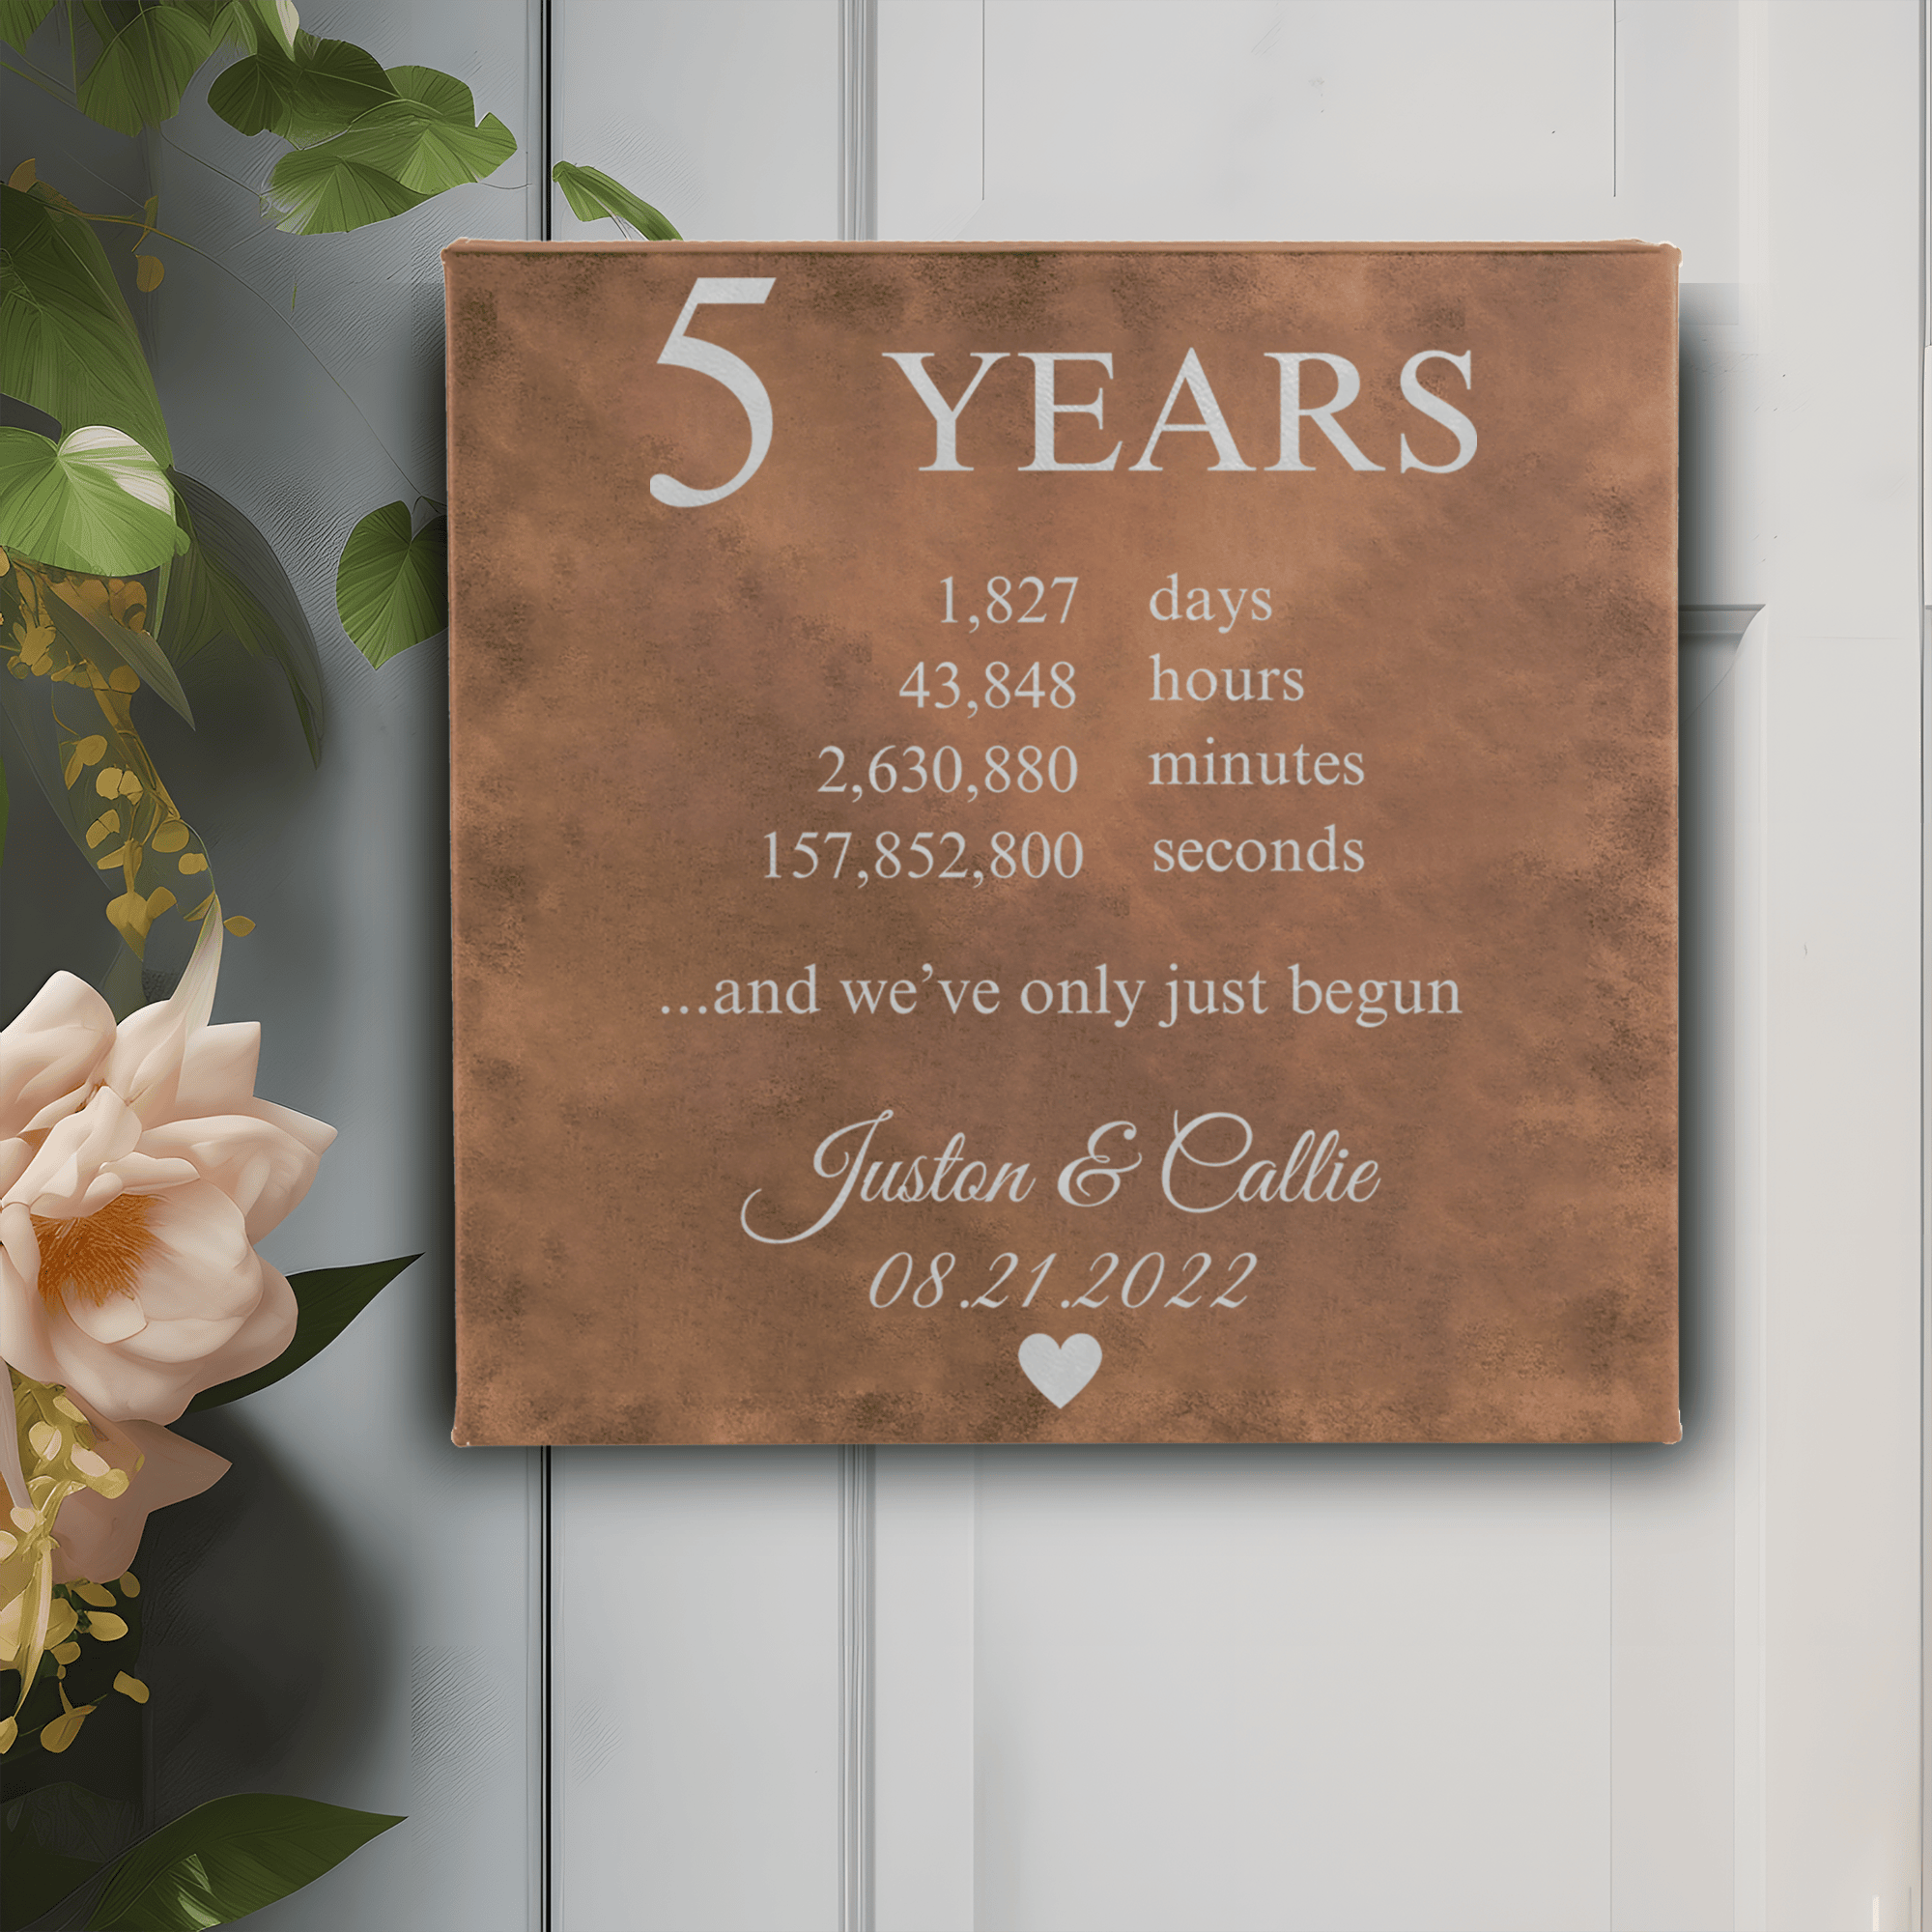 Rustic Silver Leather Wall Decor With 5 Year Anniversary Design